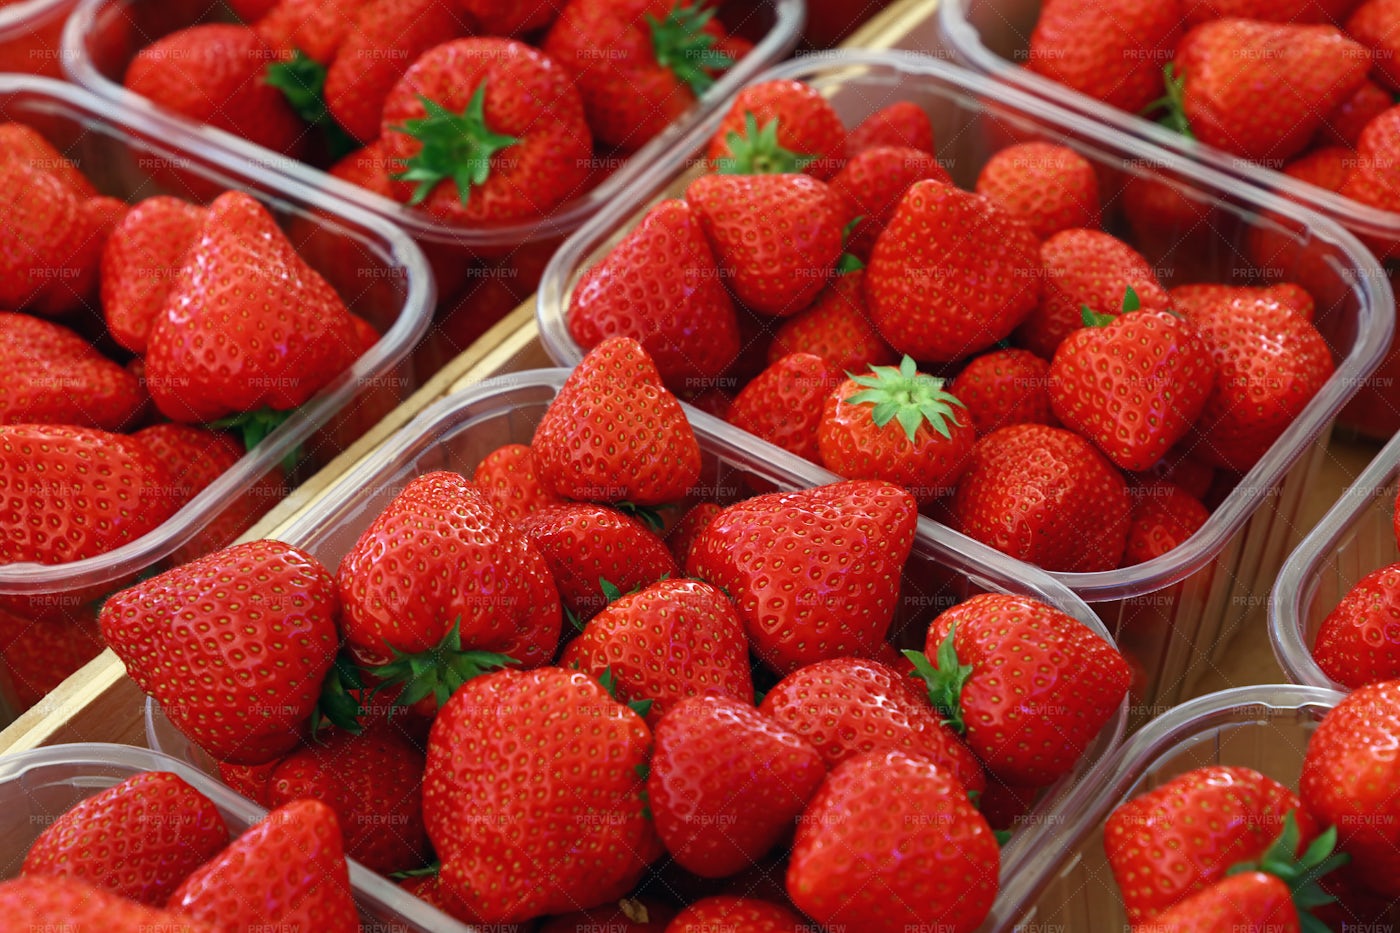 Strawberries In Containers: Stock Photos